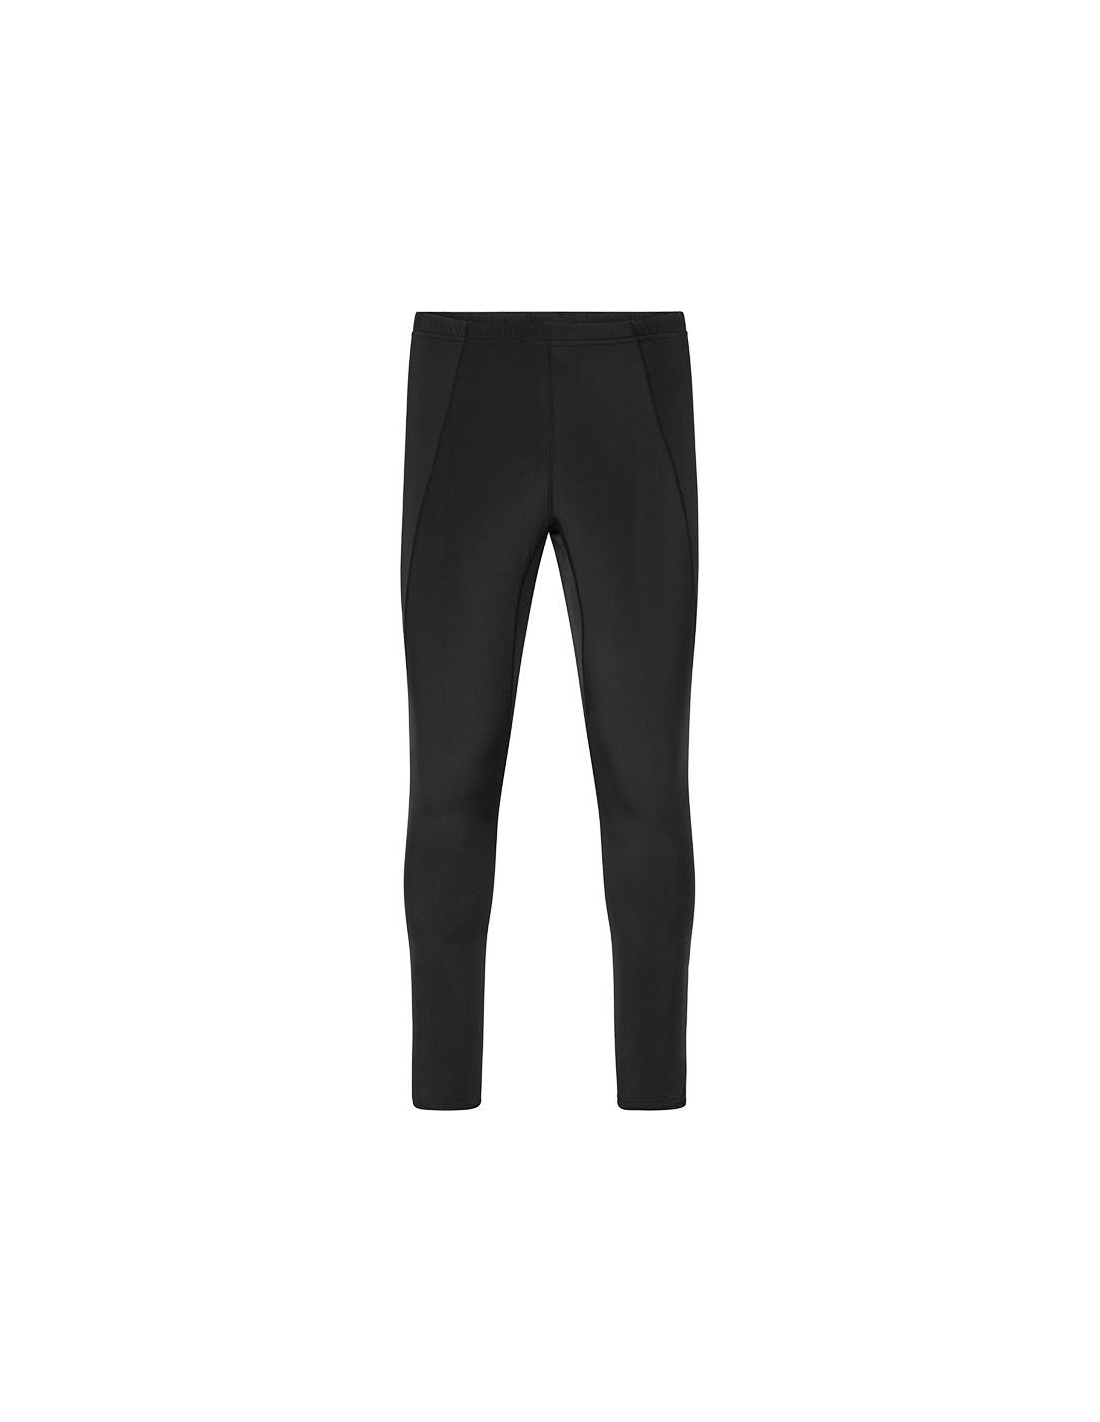 Collant running hiver Homme